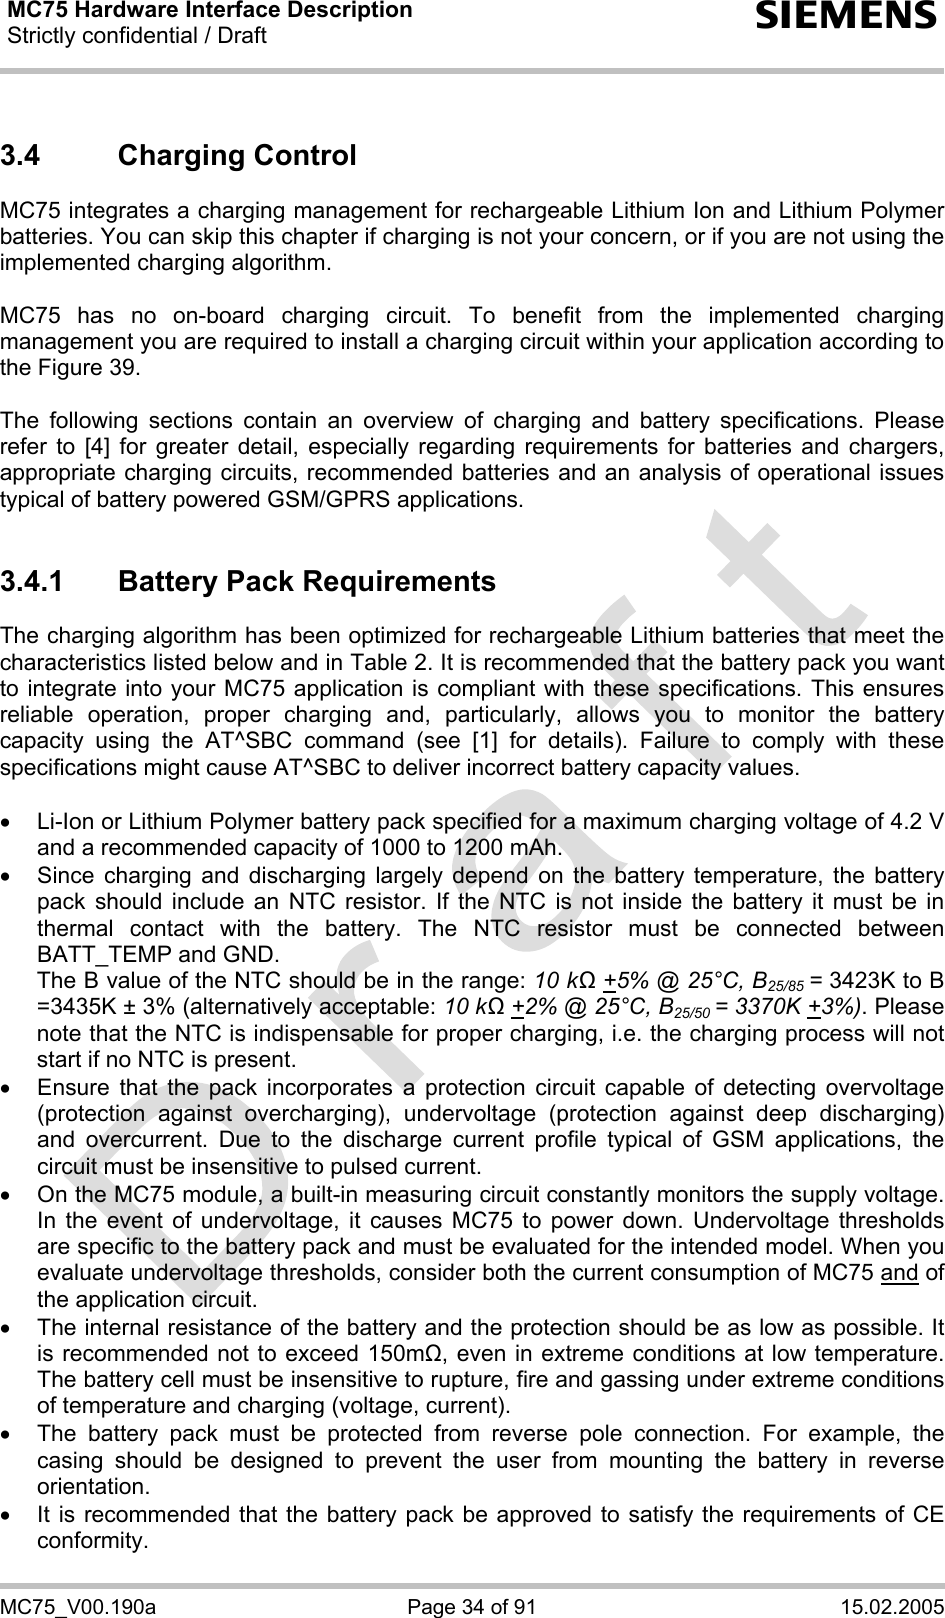 MC75 Hardware Interface Description Strictly confidential / Draft  s MC75_V00.190a  Page 34 of 91  15.02.2005 3.4 Charging Control MC75 integrates a charging management for rechargeable Lithium Ion and Lithium Polymer batteries. You can skip this chapter if charging is not your concern, or if you are not using the implemented charging algorithm.  MC75 has no on-board charging circuit. To benefit from the implemented charging management you are required to install a charging circuit within your application according to the Figure 39.   The following sections contain an overview of charging and battery specifications. Please refer to [4] for greater detail, especially regarding requirements for batteries and chargers, appropriate charging circuits, recommended batteries and an analysis of operational issues typical of battery powered GSM/GPRS applications.  3.4.1  Battery Pack Requirements The charging algorithm has been optimized for rechargeable Lithium batteries that meet the characteristics listed below and in Table 2. It is recommended that the battery pack you want to integrate into your MC75 application is compliant with these specifications. This ensures reliable operation, proper charging and, particularly, allows you to monitor the battery capacity using the AT^SBC command (see [1] for details). Failure to comply with these specifications might cause AT^SBC to deliver incorrect battery capacity values.   •  Li-Ion or Lithium Polymer battery pack specified for a maximum charging voltage of 4.2 V and a recommended capacity of 1000 to 1200 mAh.  •  Since charging and discharging largely depend on the battery temperature, the battery pack should include an NTC resistor. If the NTC is not inside the battery it must be in thermal contact with the battery. The NTC resistor must be connected between BATT_TEMP and GND.  The B value of the NTC should be in the range: 10 kΩ +5% @ 25°C, B25/85 = 3423K to B =3435K ± 3% (alternatively acceptable: 10 kΩ +2% @ 25°C, B25/50 = 3370K +3%). Please note that the NTC is indispensable for proper charging, i.e. the charging process will not start if no NTC is present. •  Ensure that the pack incorporates a protection circuit capable of detecting overvoltage (protection against overcharging), undervoltage (protection against deep discharging) and overcurrent. Due to the discharge current profile typical of GSM applications, the circuit must be insensitive to pulsed current. •  On the MC75 module, a built-in measuring circuit constantly monitors the supply voltage. In the event of undervoltage, it causes MC75 to power down. Undervoltage thresholds are specific to the battery pack and must be evaluated for the intended model. When you evaluate undervoltage thresholds, consider both the current consumption of MC75 and of the application circuit.  •  The internal resistance of the battery and the protection should be as low as possible. It is recommended not to exceed 150m, even in extreme conditions at low temperature. The battery cell must be insensitive to rupture, fire and gassing under extreme conditions of temperature and charging (voltage, current). •  The battery pack must be protected from reverse pole connection. For example, the casing should be designed to prevent the user from mounting the battery in reverse orientation. •  It is recommended that the battery pack be approved to satisfy the requirements of CE conformity. 